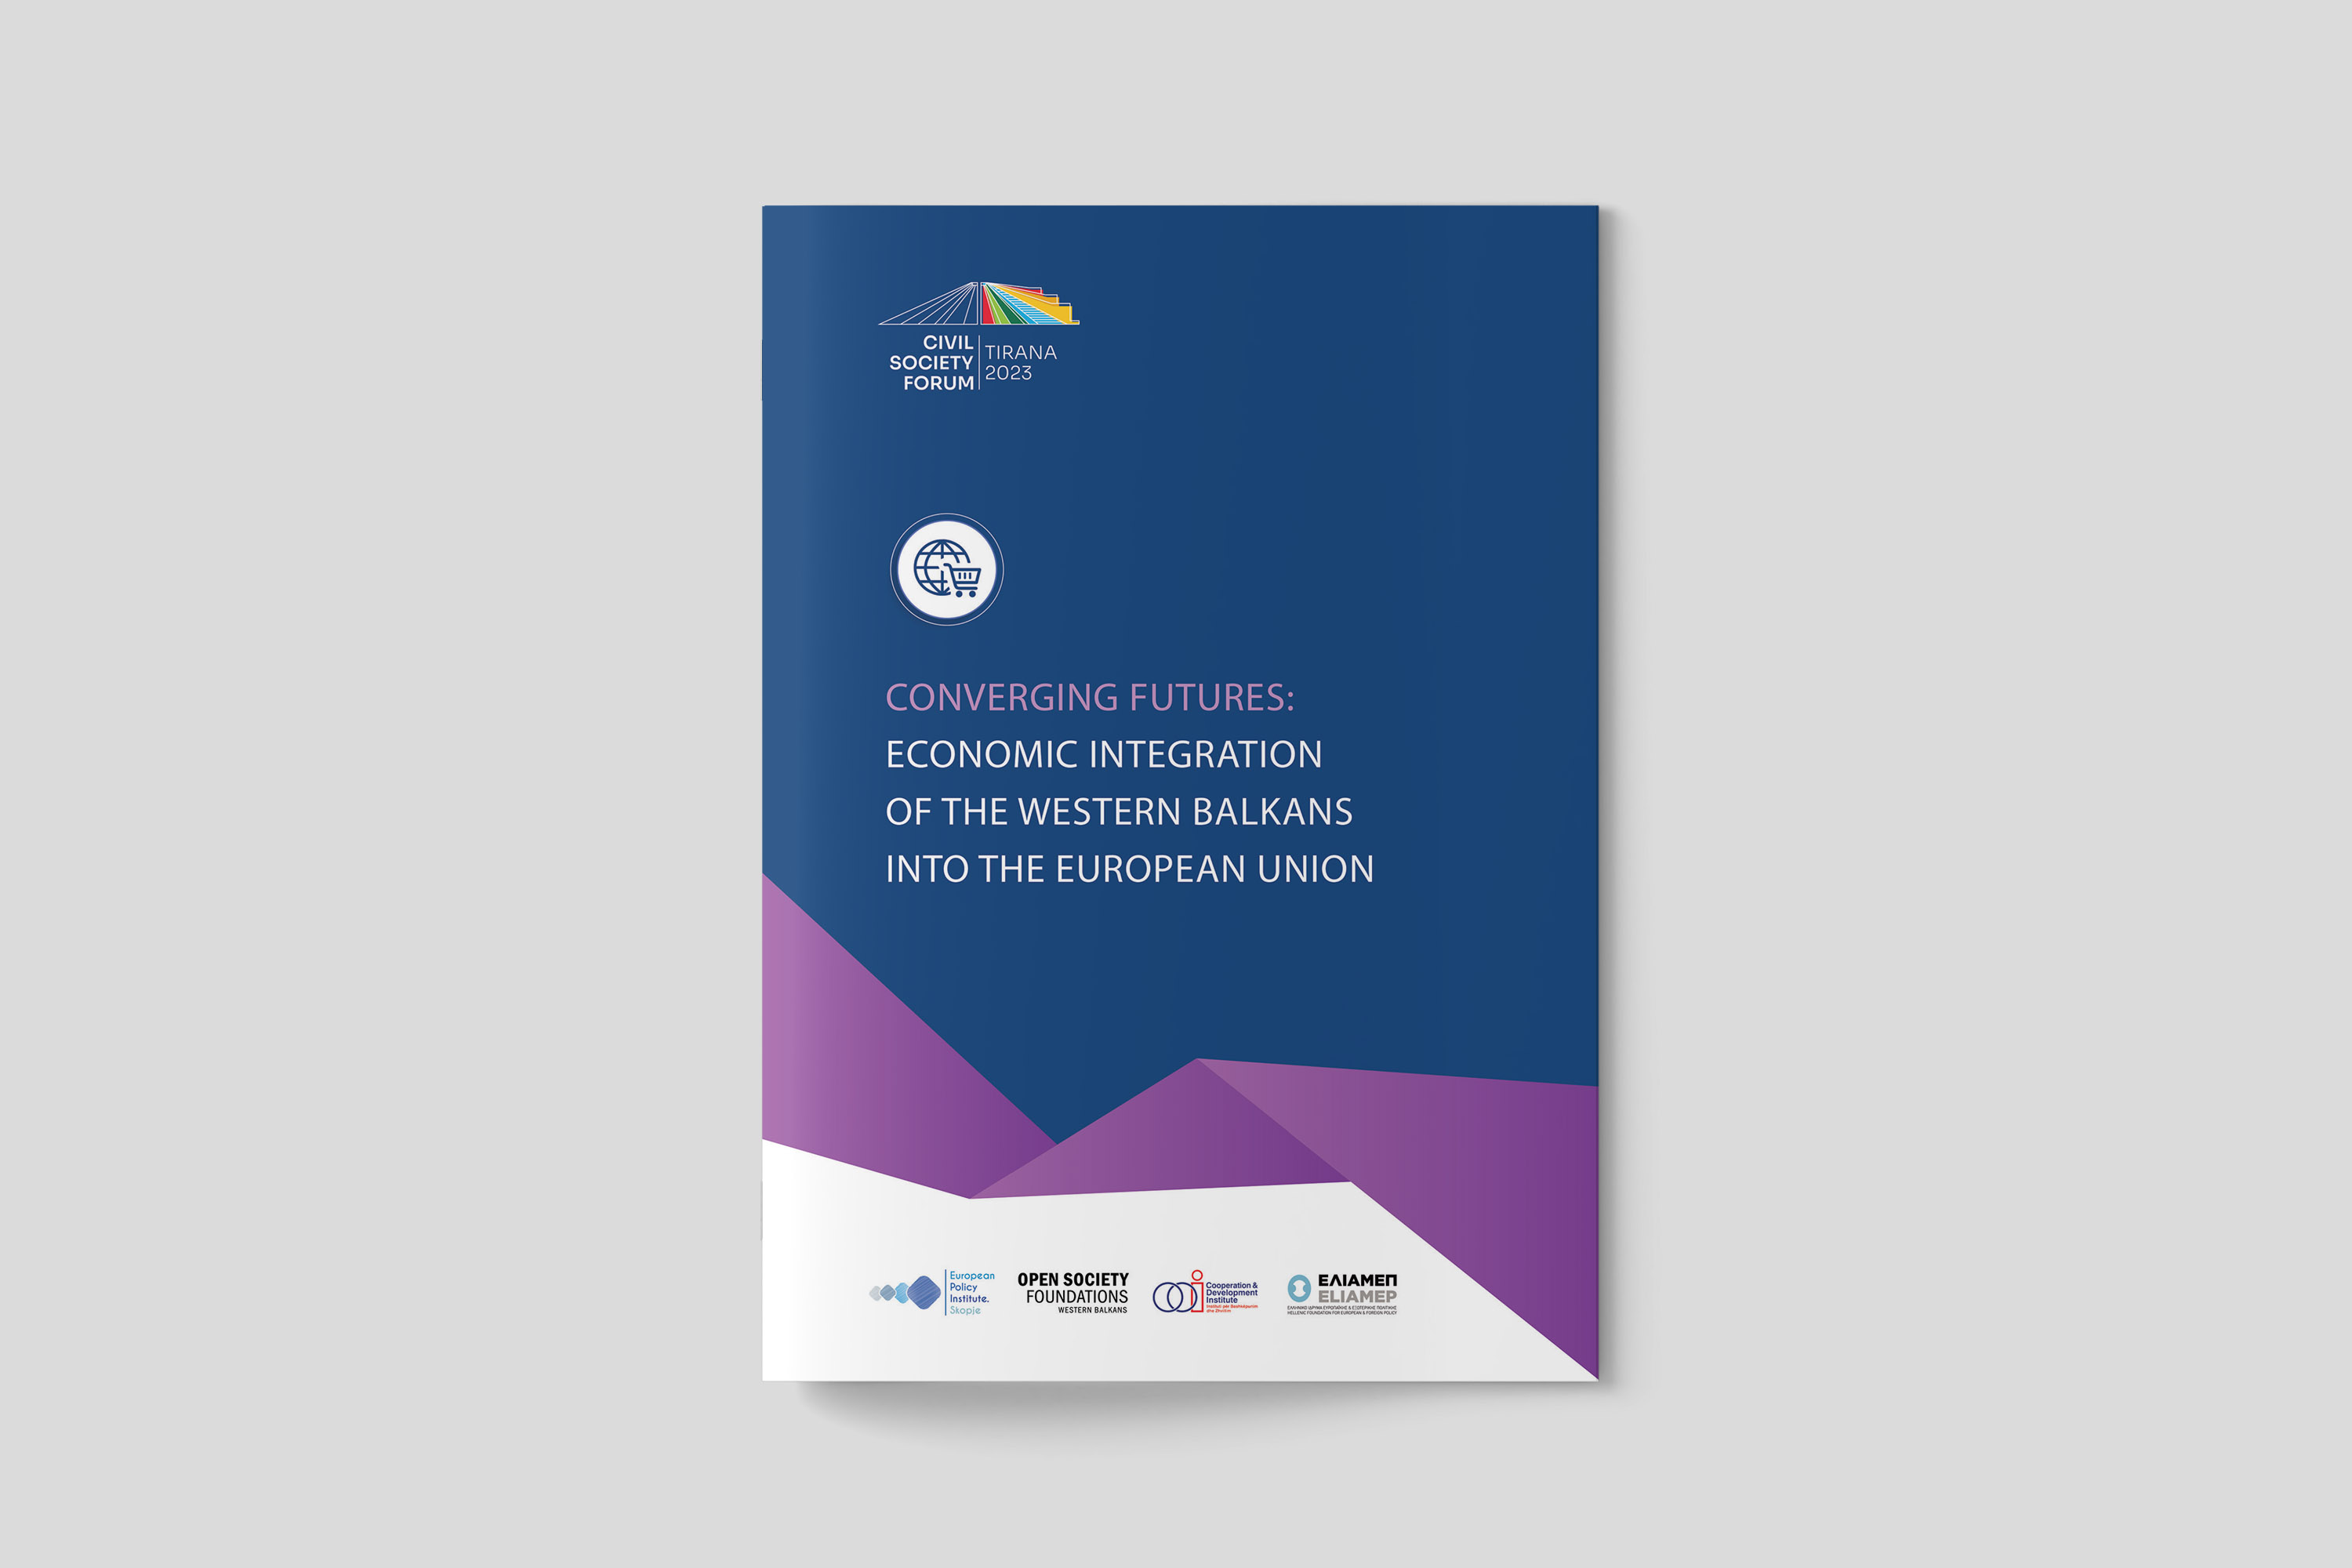 Converging futures: Economic integration of the Western Balkans into the European Union